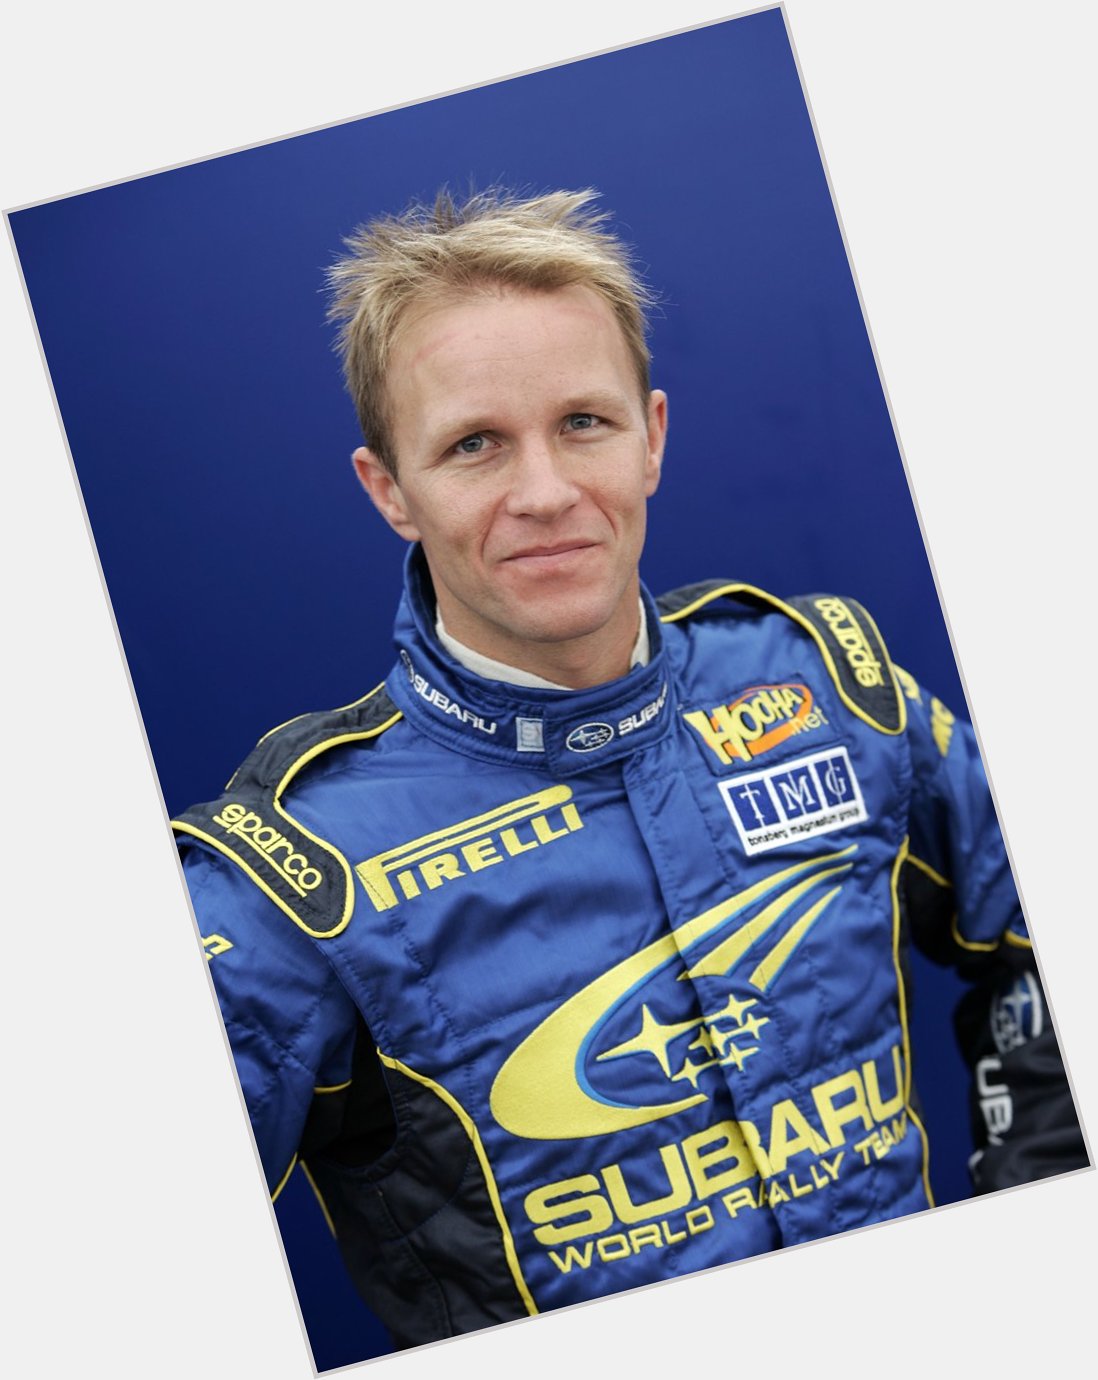 Https://fanpagepress.net/m/P/Petter Solberg Exclusive Hot Pic 3